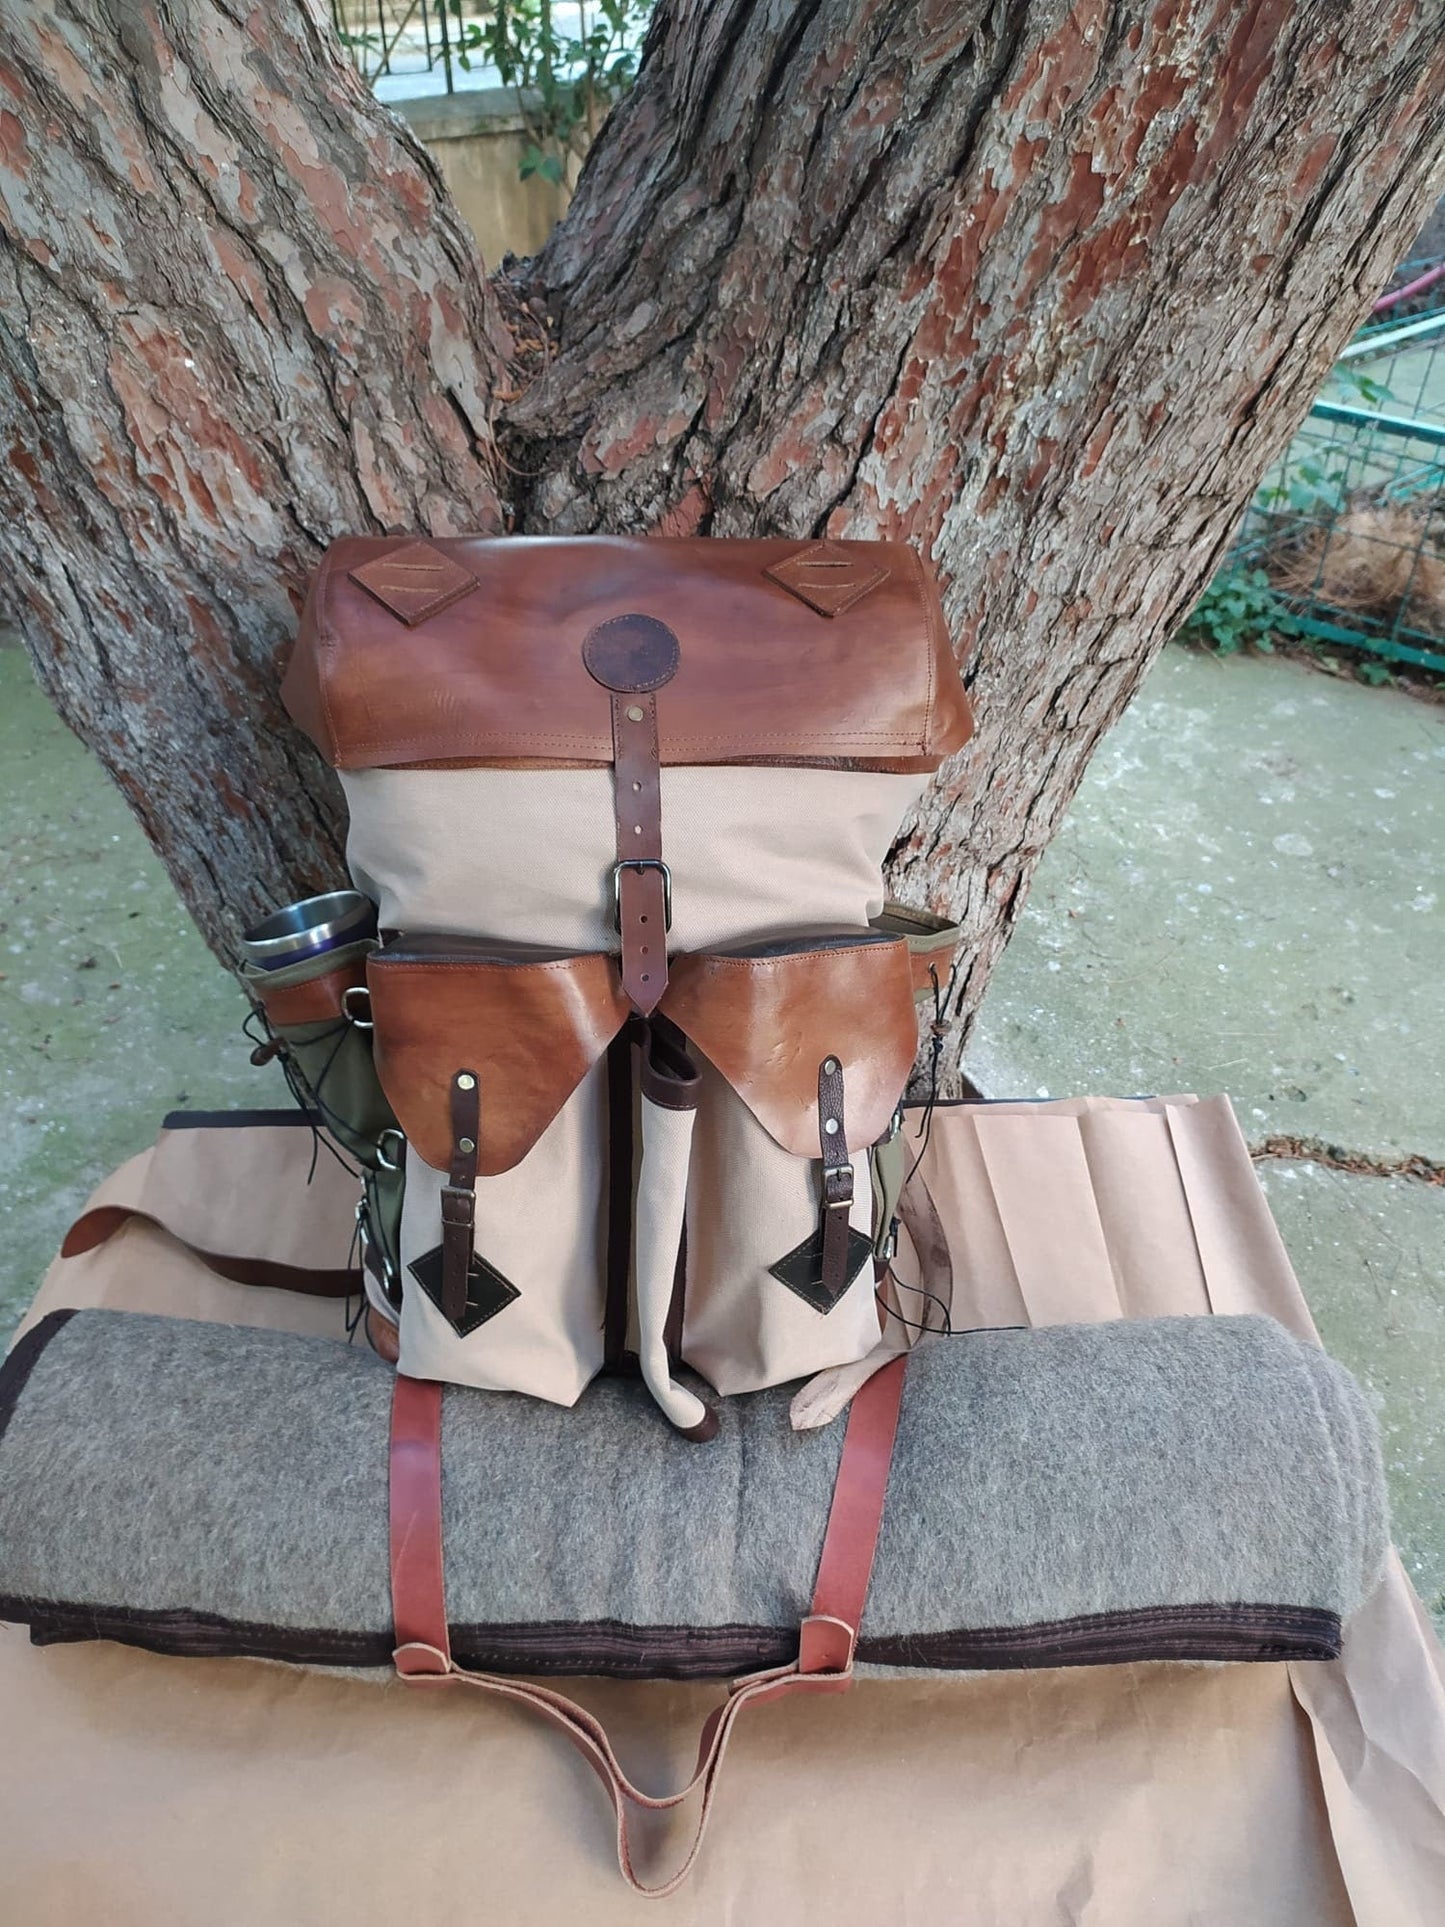 Handmade Fur with Leather and Waxed Canvas backpack | Bag for Travel, Camping, Daypack, Hiking, bushcraft | 45 Liter | Personalization bushcraft - camping - hiking backpack 99percenthandmade   